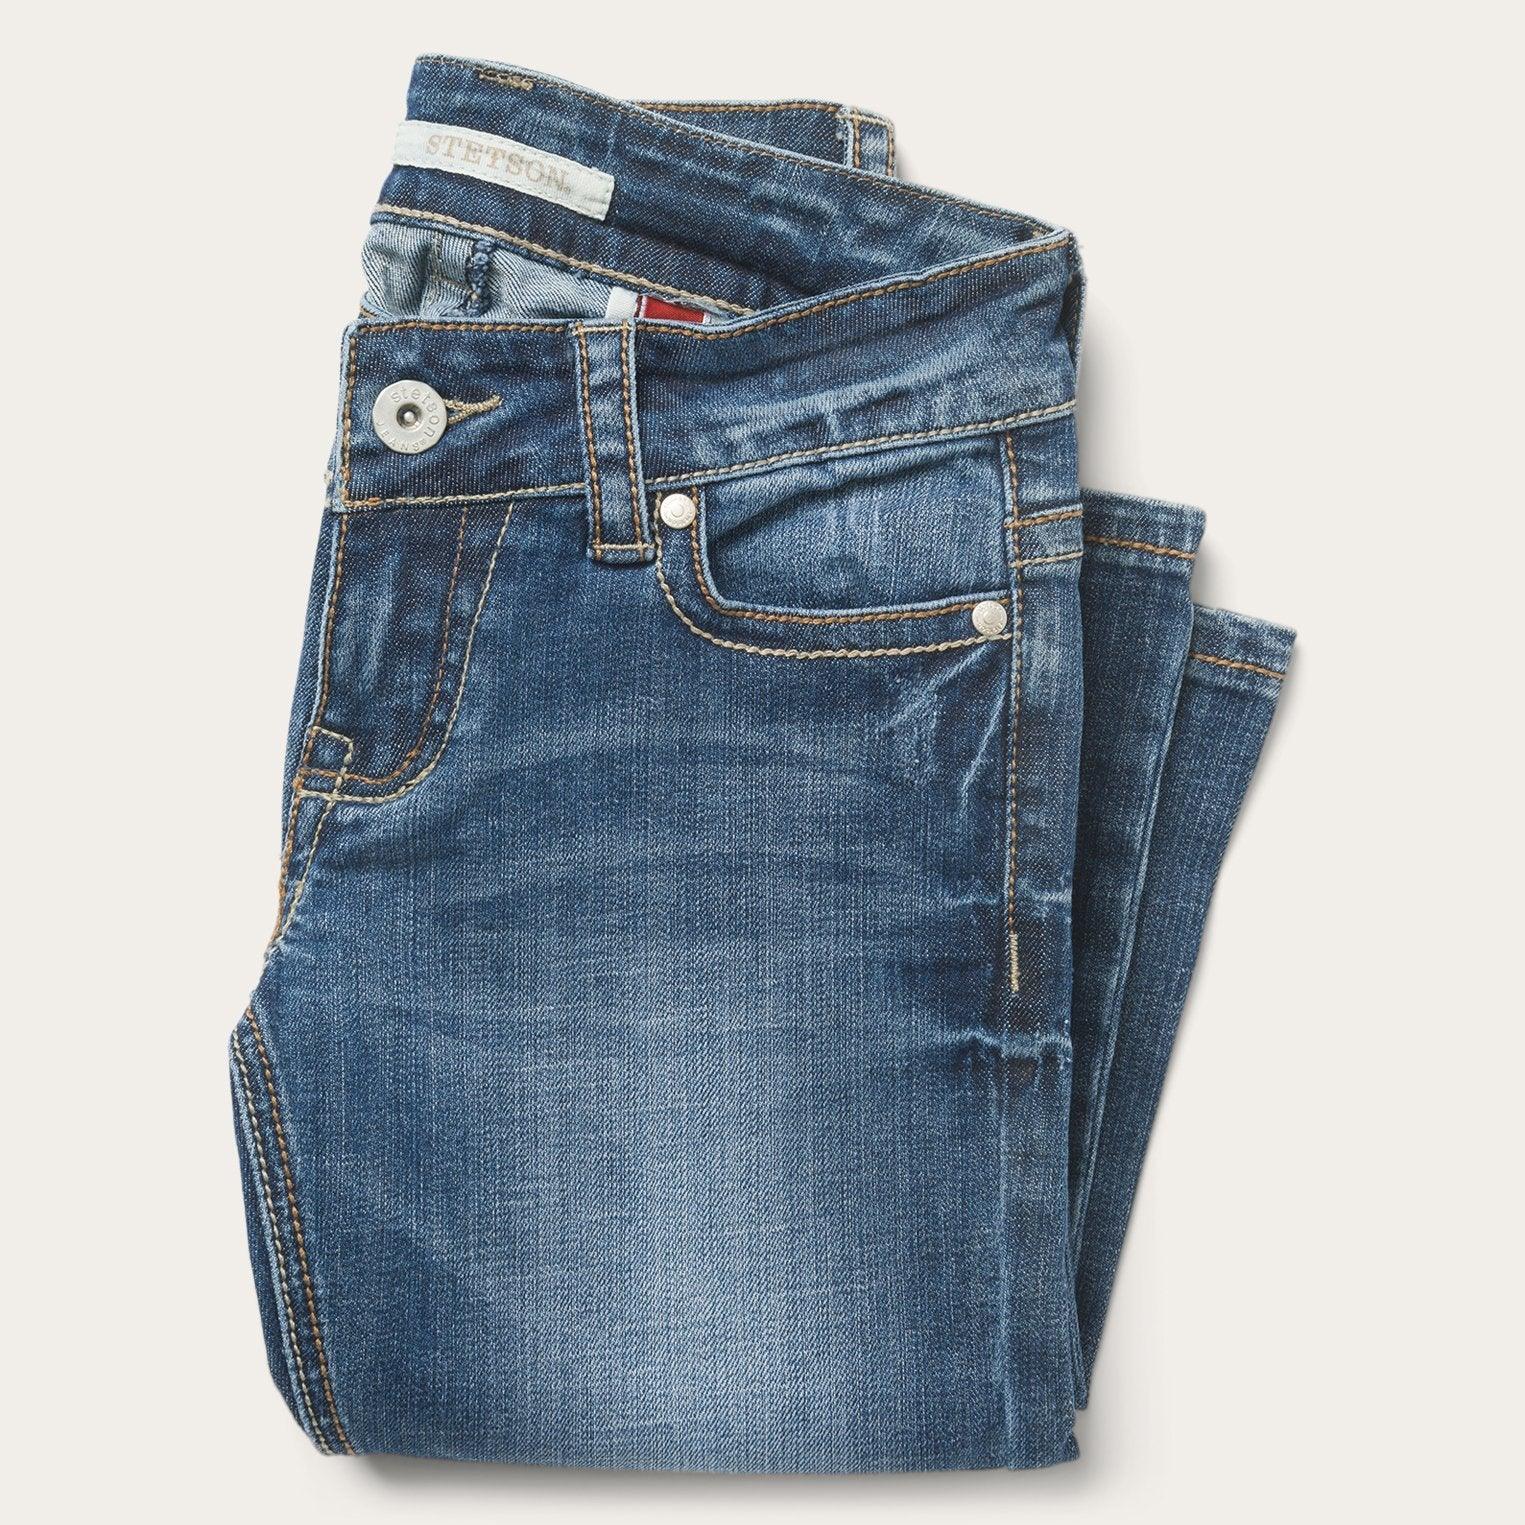 Stetson 818 Fit Jean With "X" Stitching On Back Pockets - Flyclothing LLC